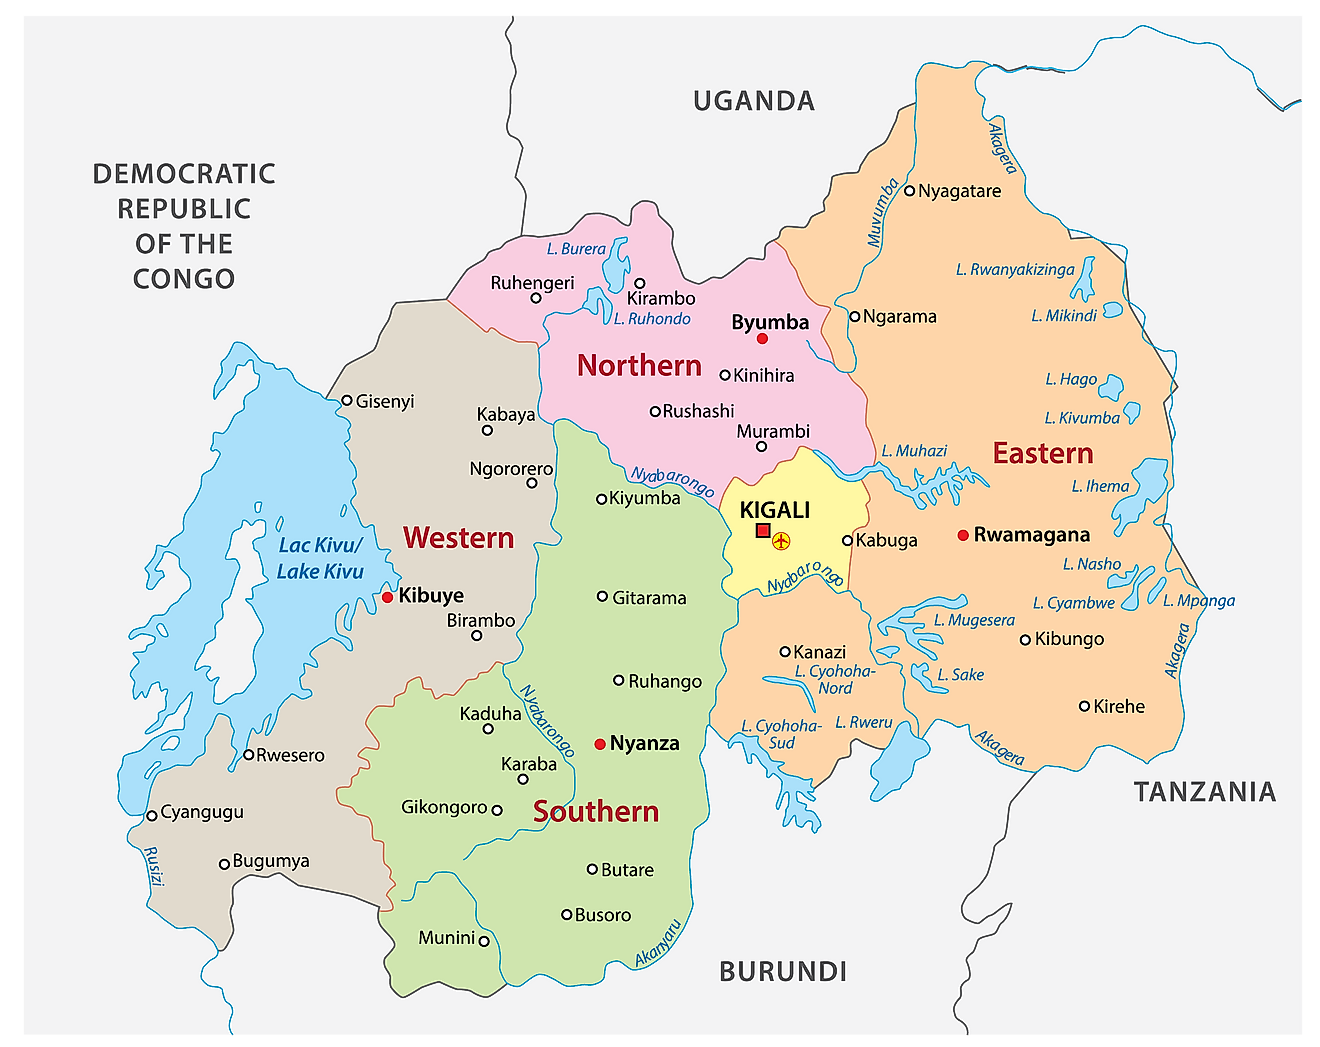 Political Map of Rwanda displaying its five provinces, their capital cities, and the national capital of Kigali City.